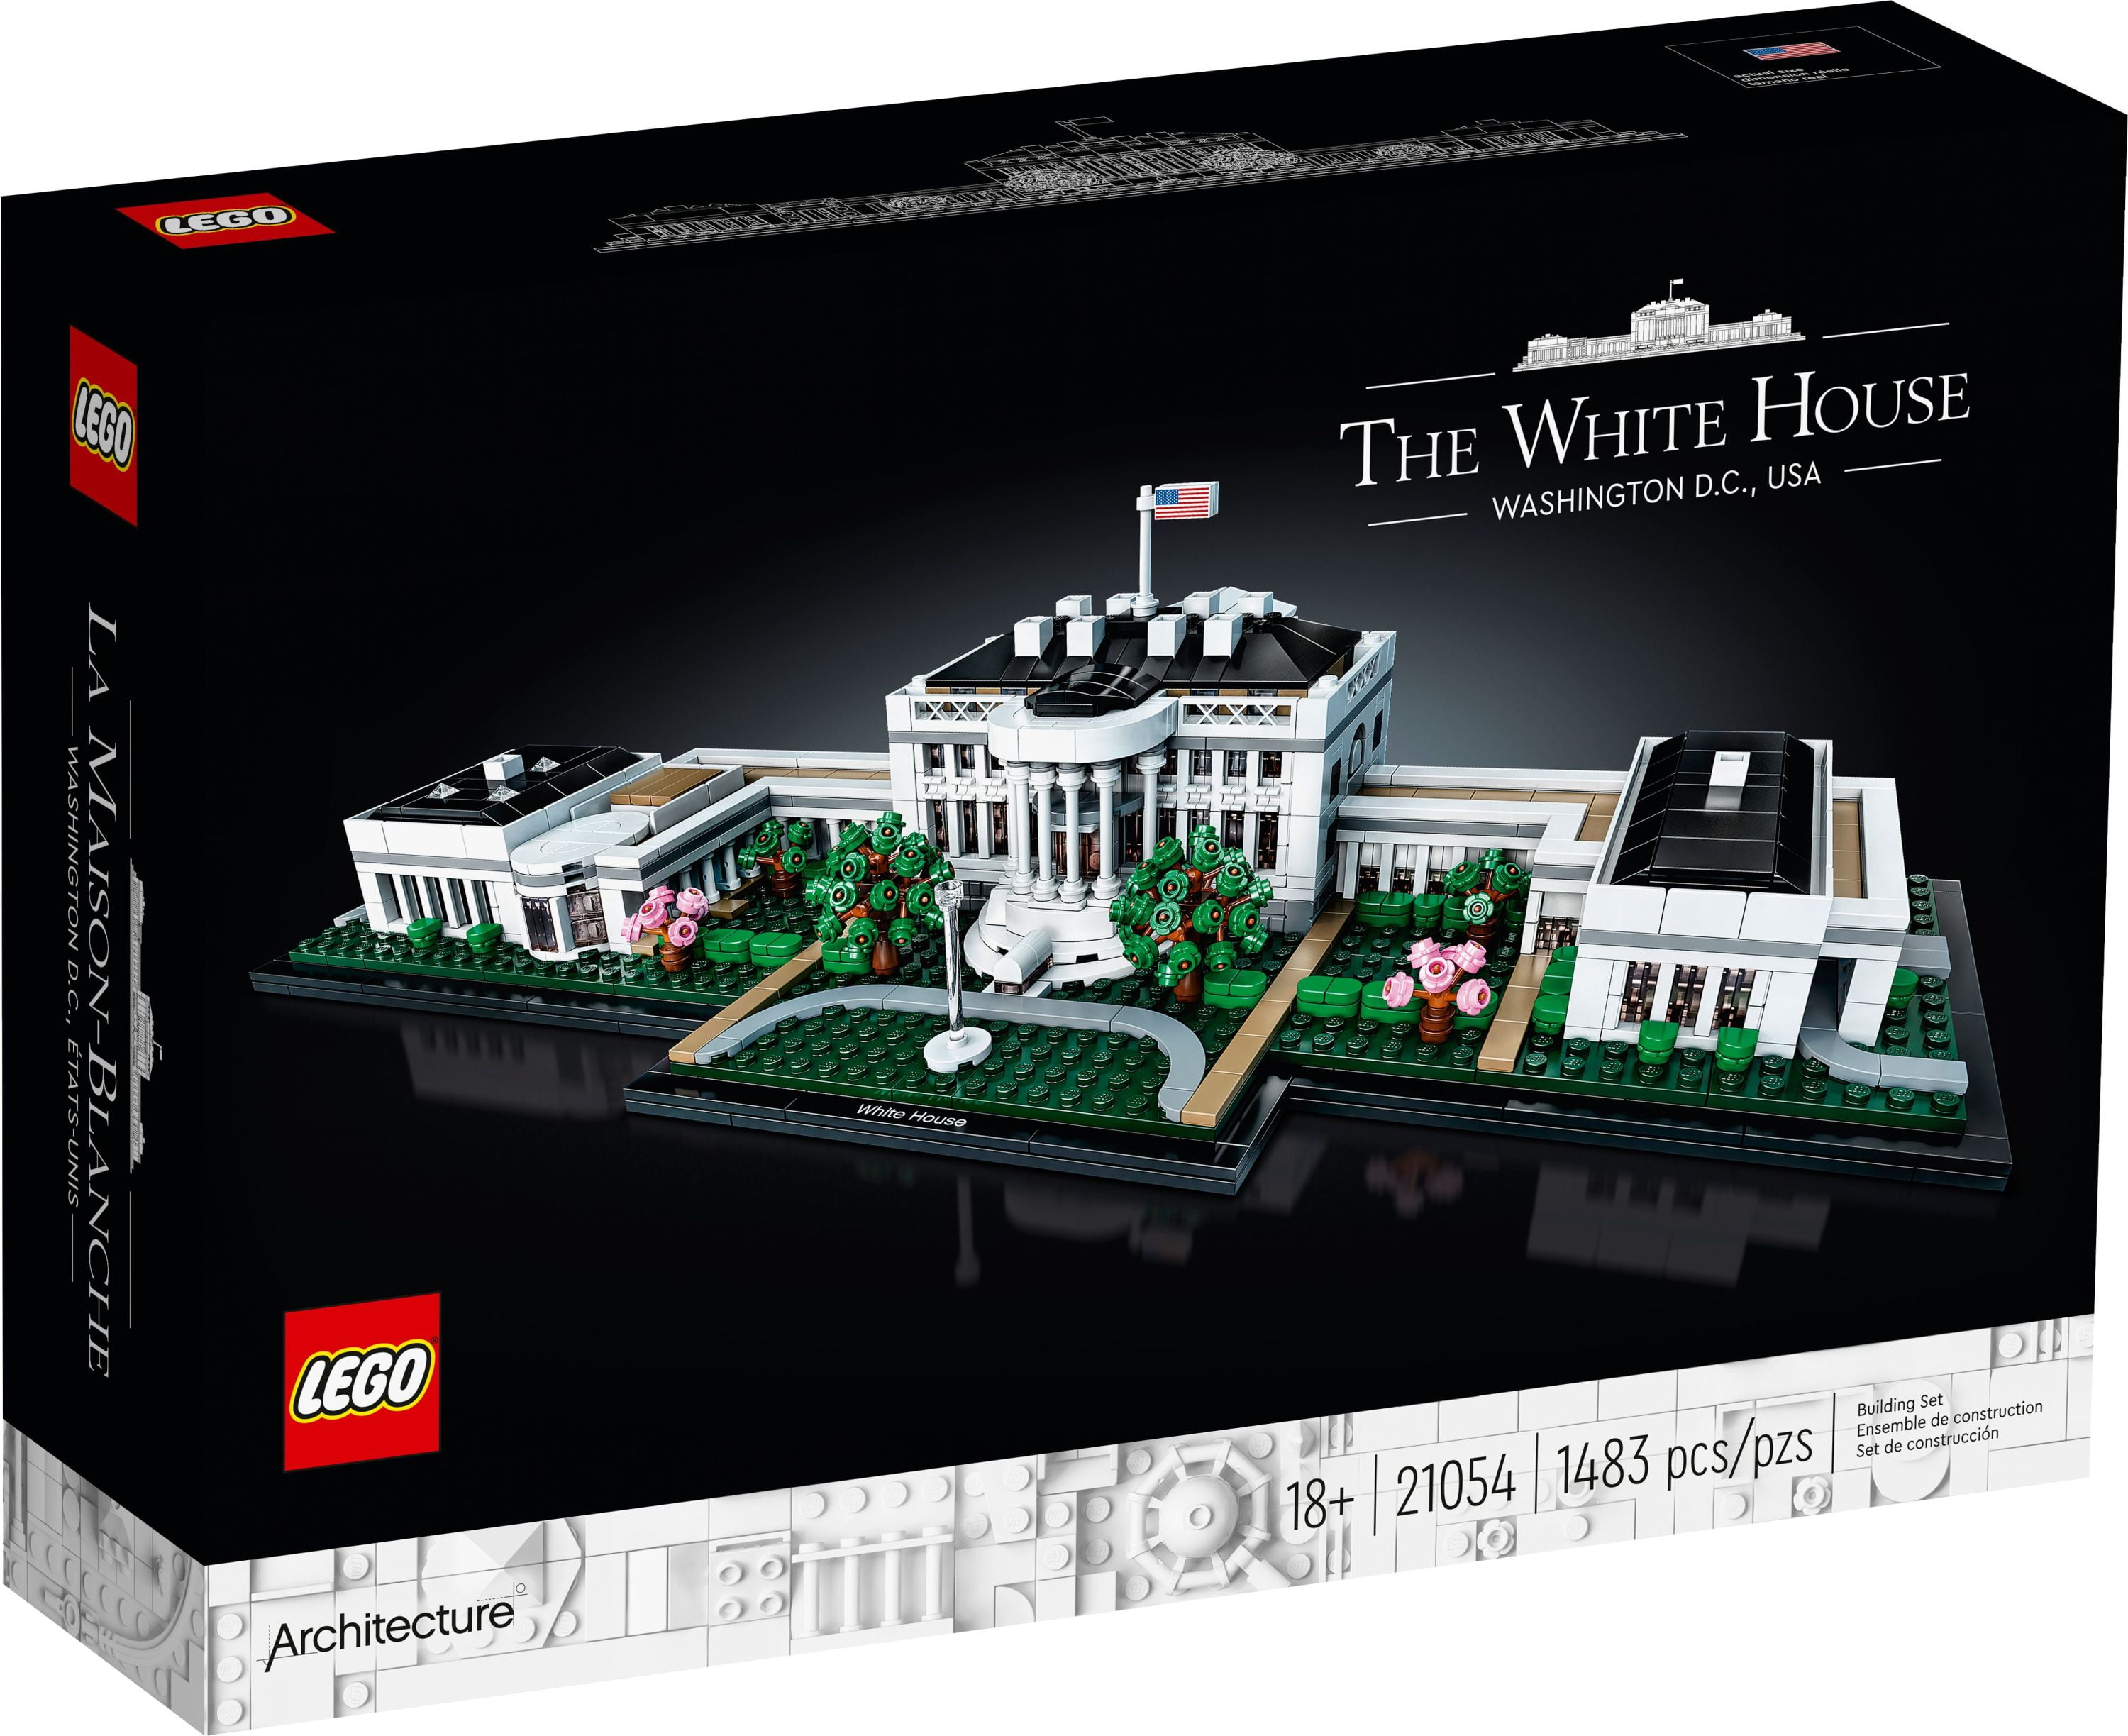 The White House 21054 Display Model Building Kit, Landmark Collection for Adults, Collectible Home Décor Gift Walmart.com